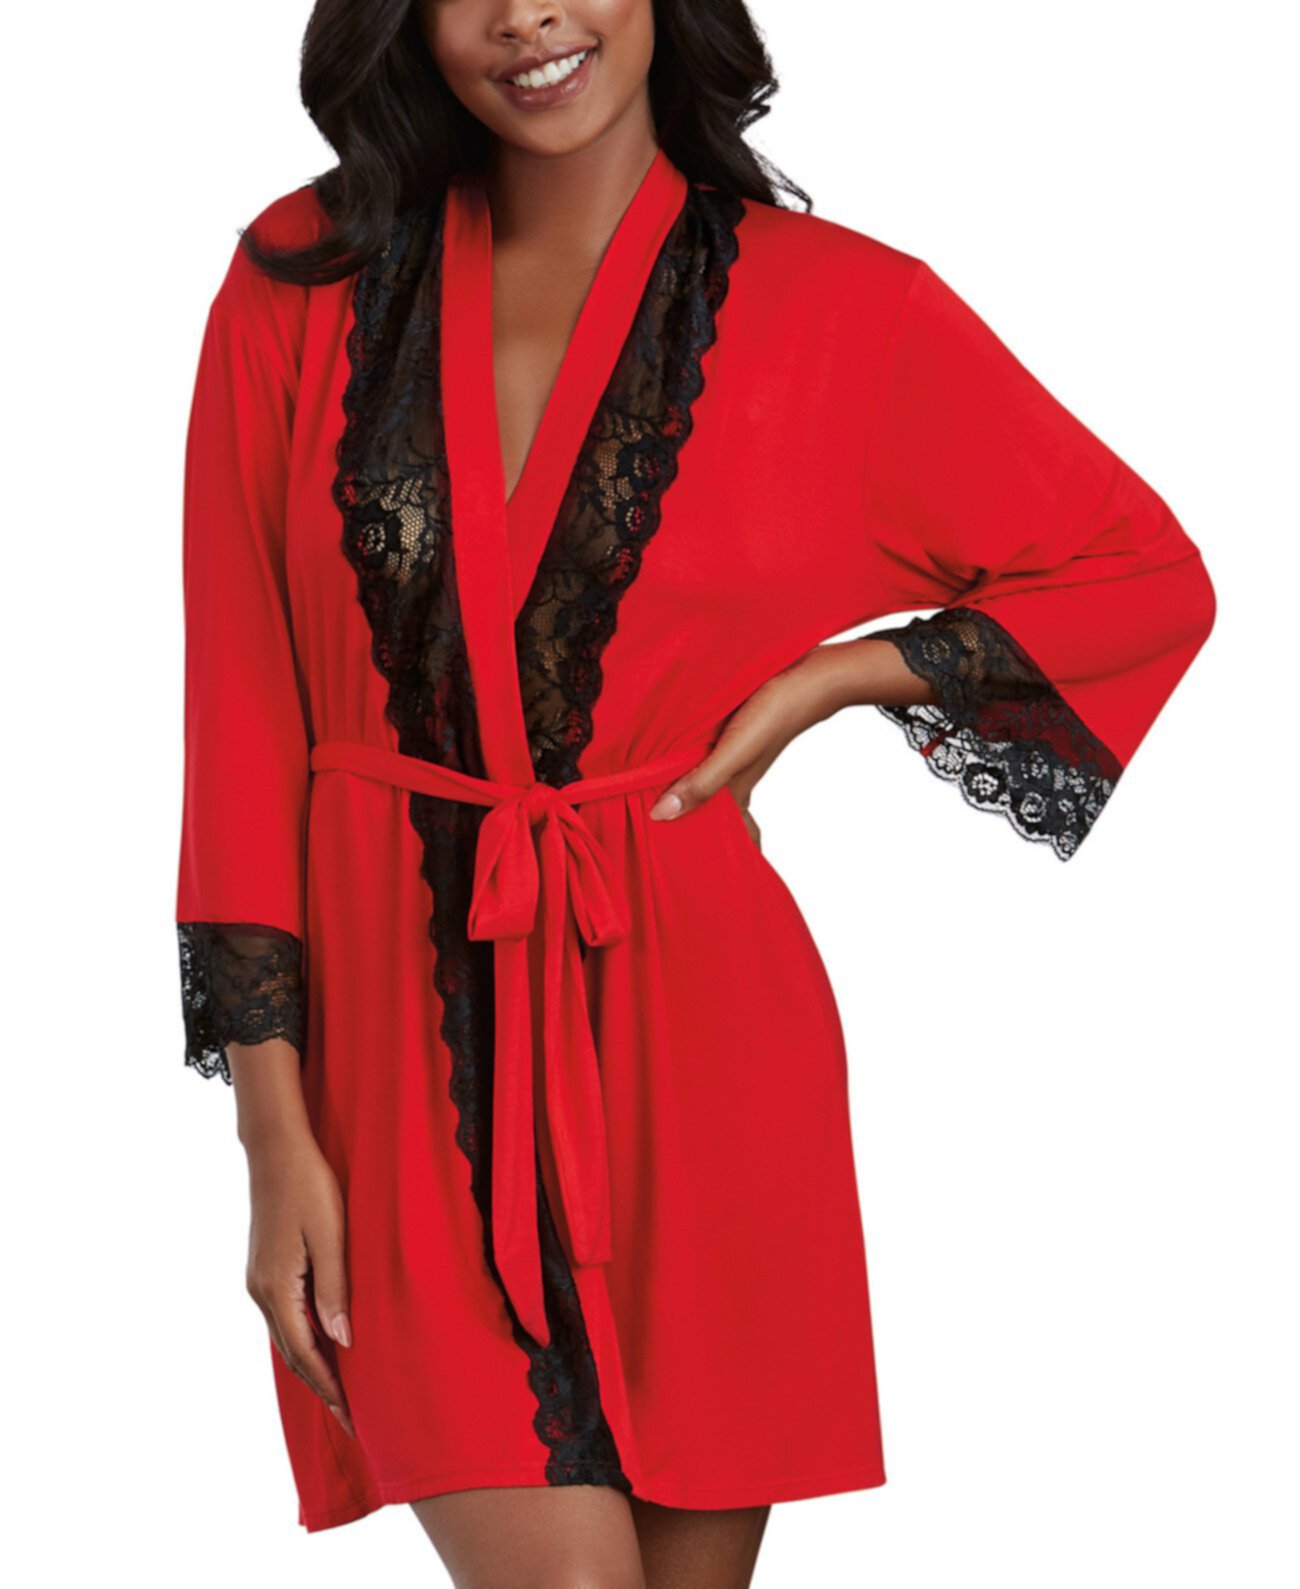 Soft Spandex Jersey Robe With Lace Inserts Dreamgirl